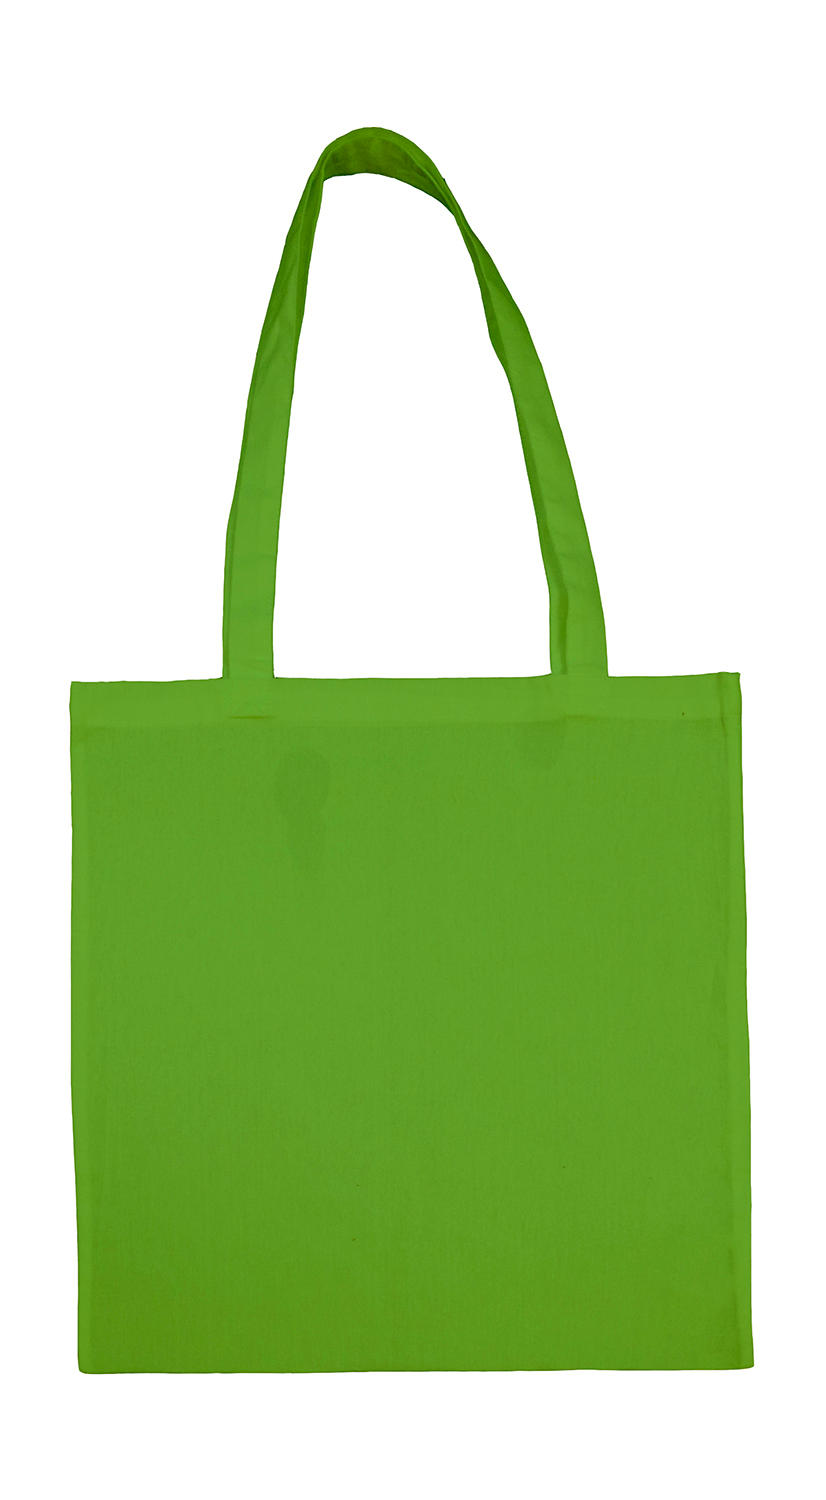  Cotton Bag LH in Farbe Light Green